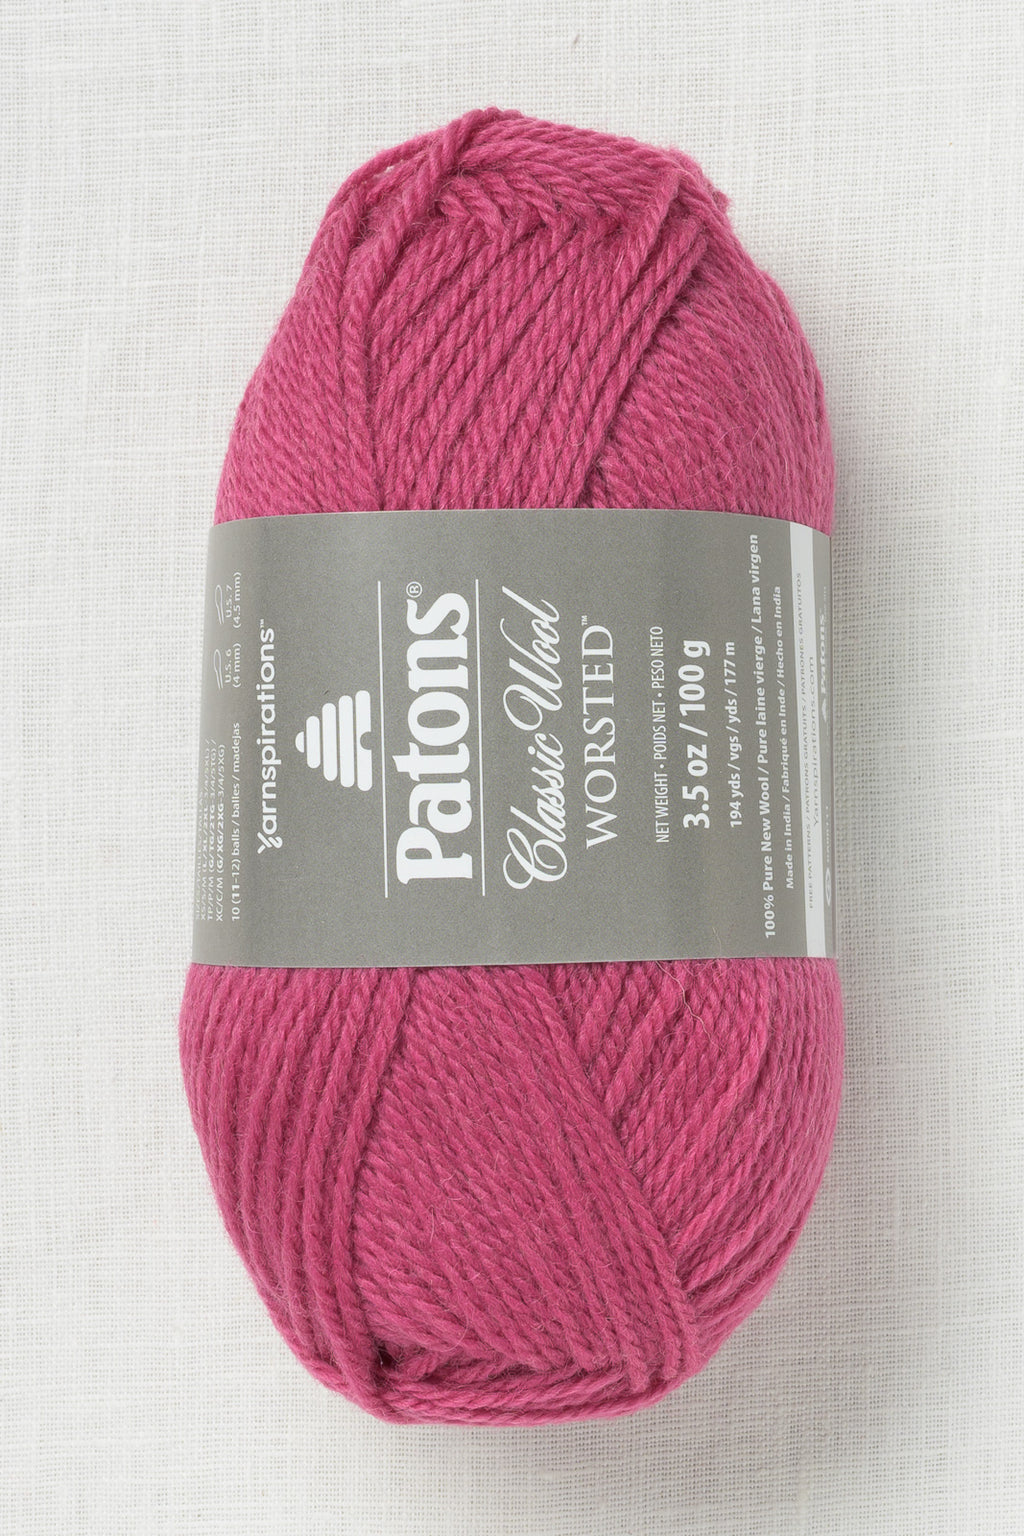 Patons Classic Wool Worsted Rich Raspberry